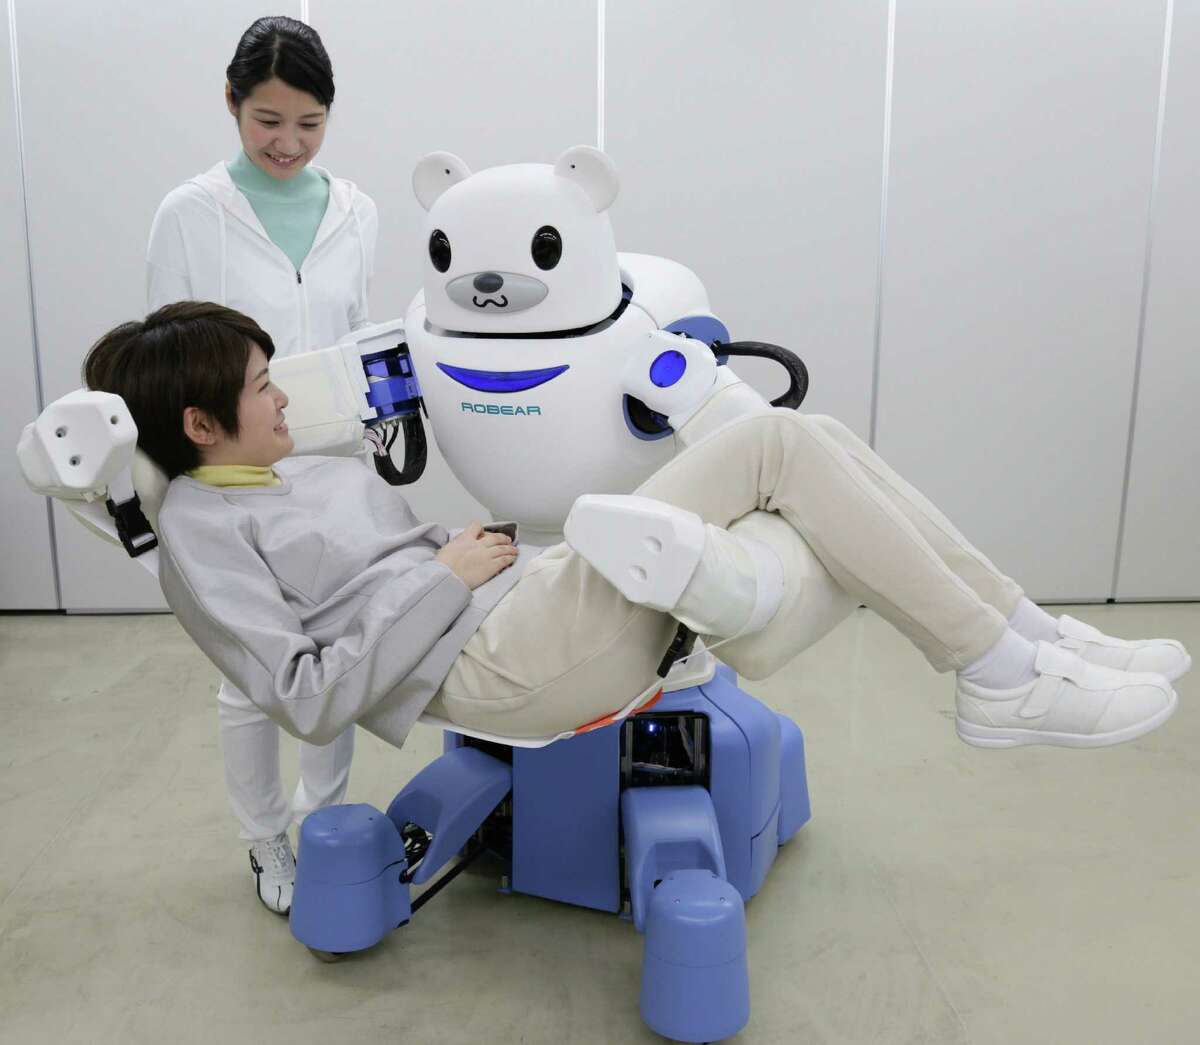 Judson ISD teacher Joseph Jacobson says anyone curious about the future of robotics should look to Japan. This picture taken on Feb. 23, 2015, shows a polar bear robot "Robear" lifting a woman for a demonstration in Nagoya, central Japan. The "Robear," developed by Riken Institute and Sumitomo Riko, has a polar cub-like face with big doey eyes, but packs enough power to transfer frail patients from a wheelchair to a bed or a bath.